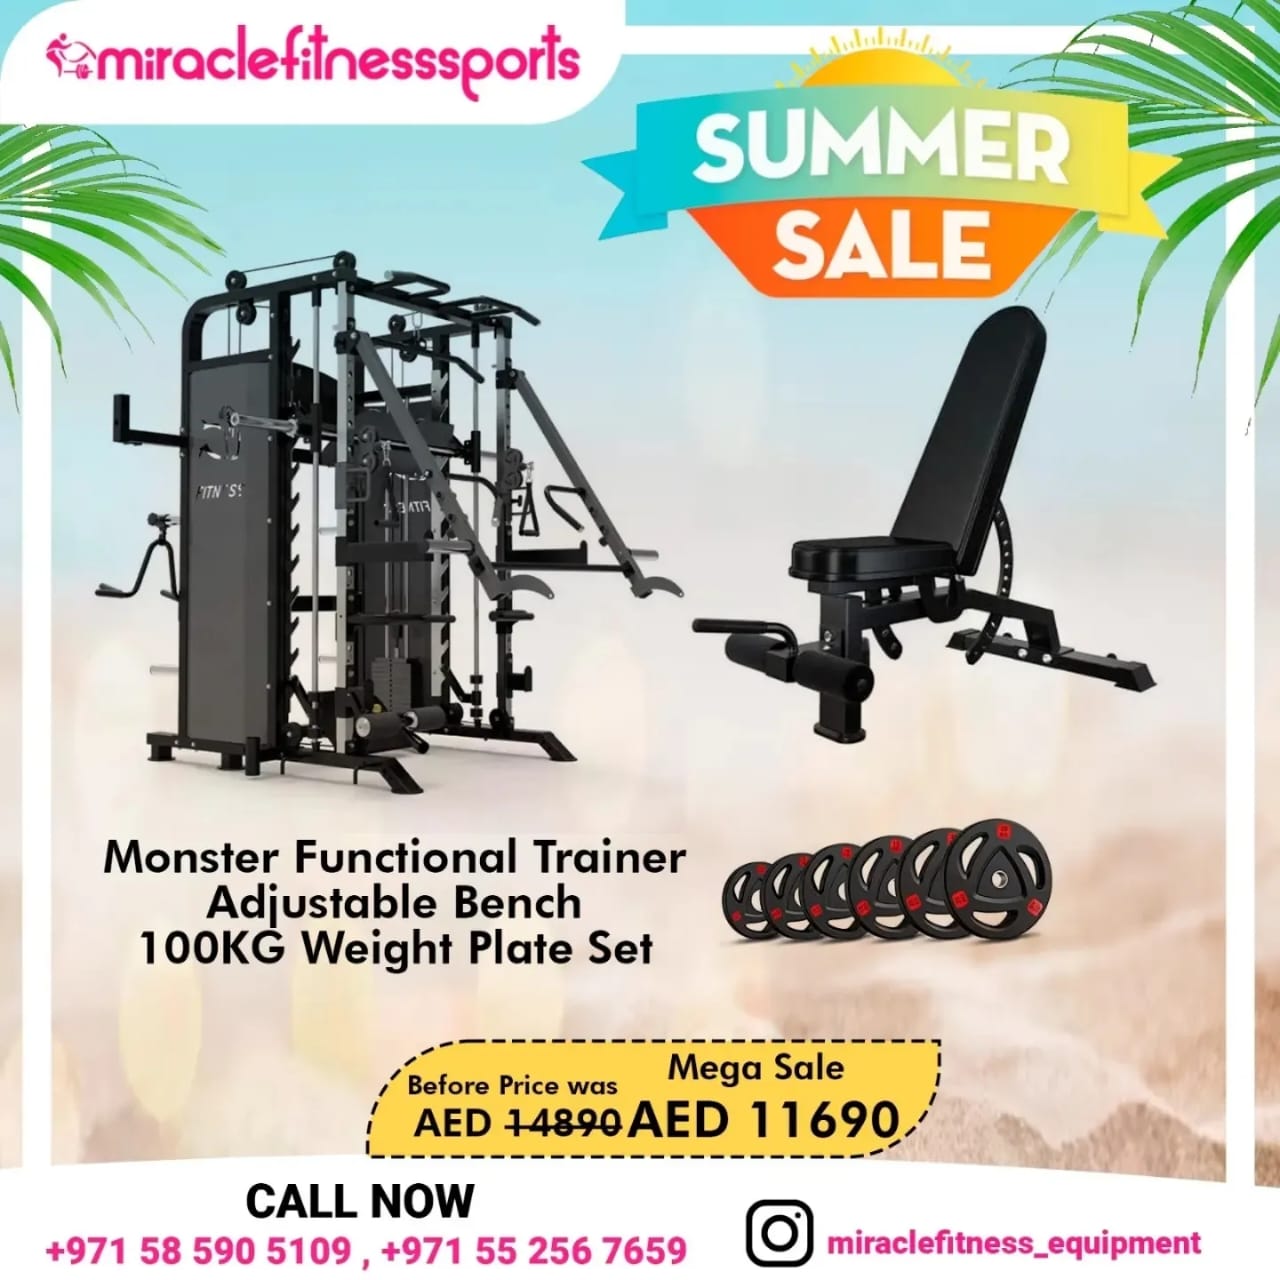 All in One Monster Functional Trainer Combo